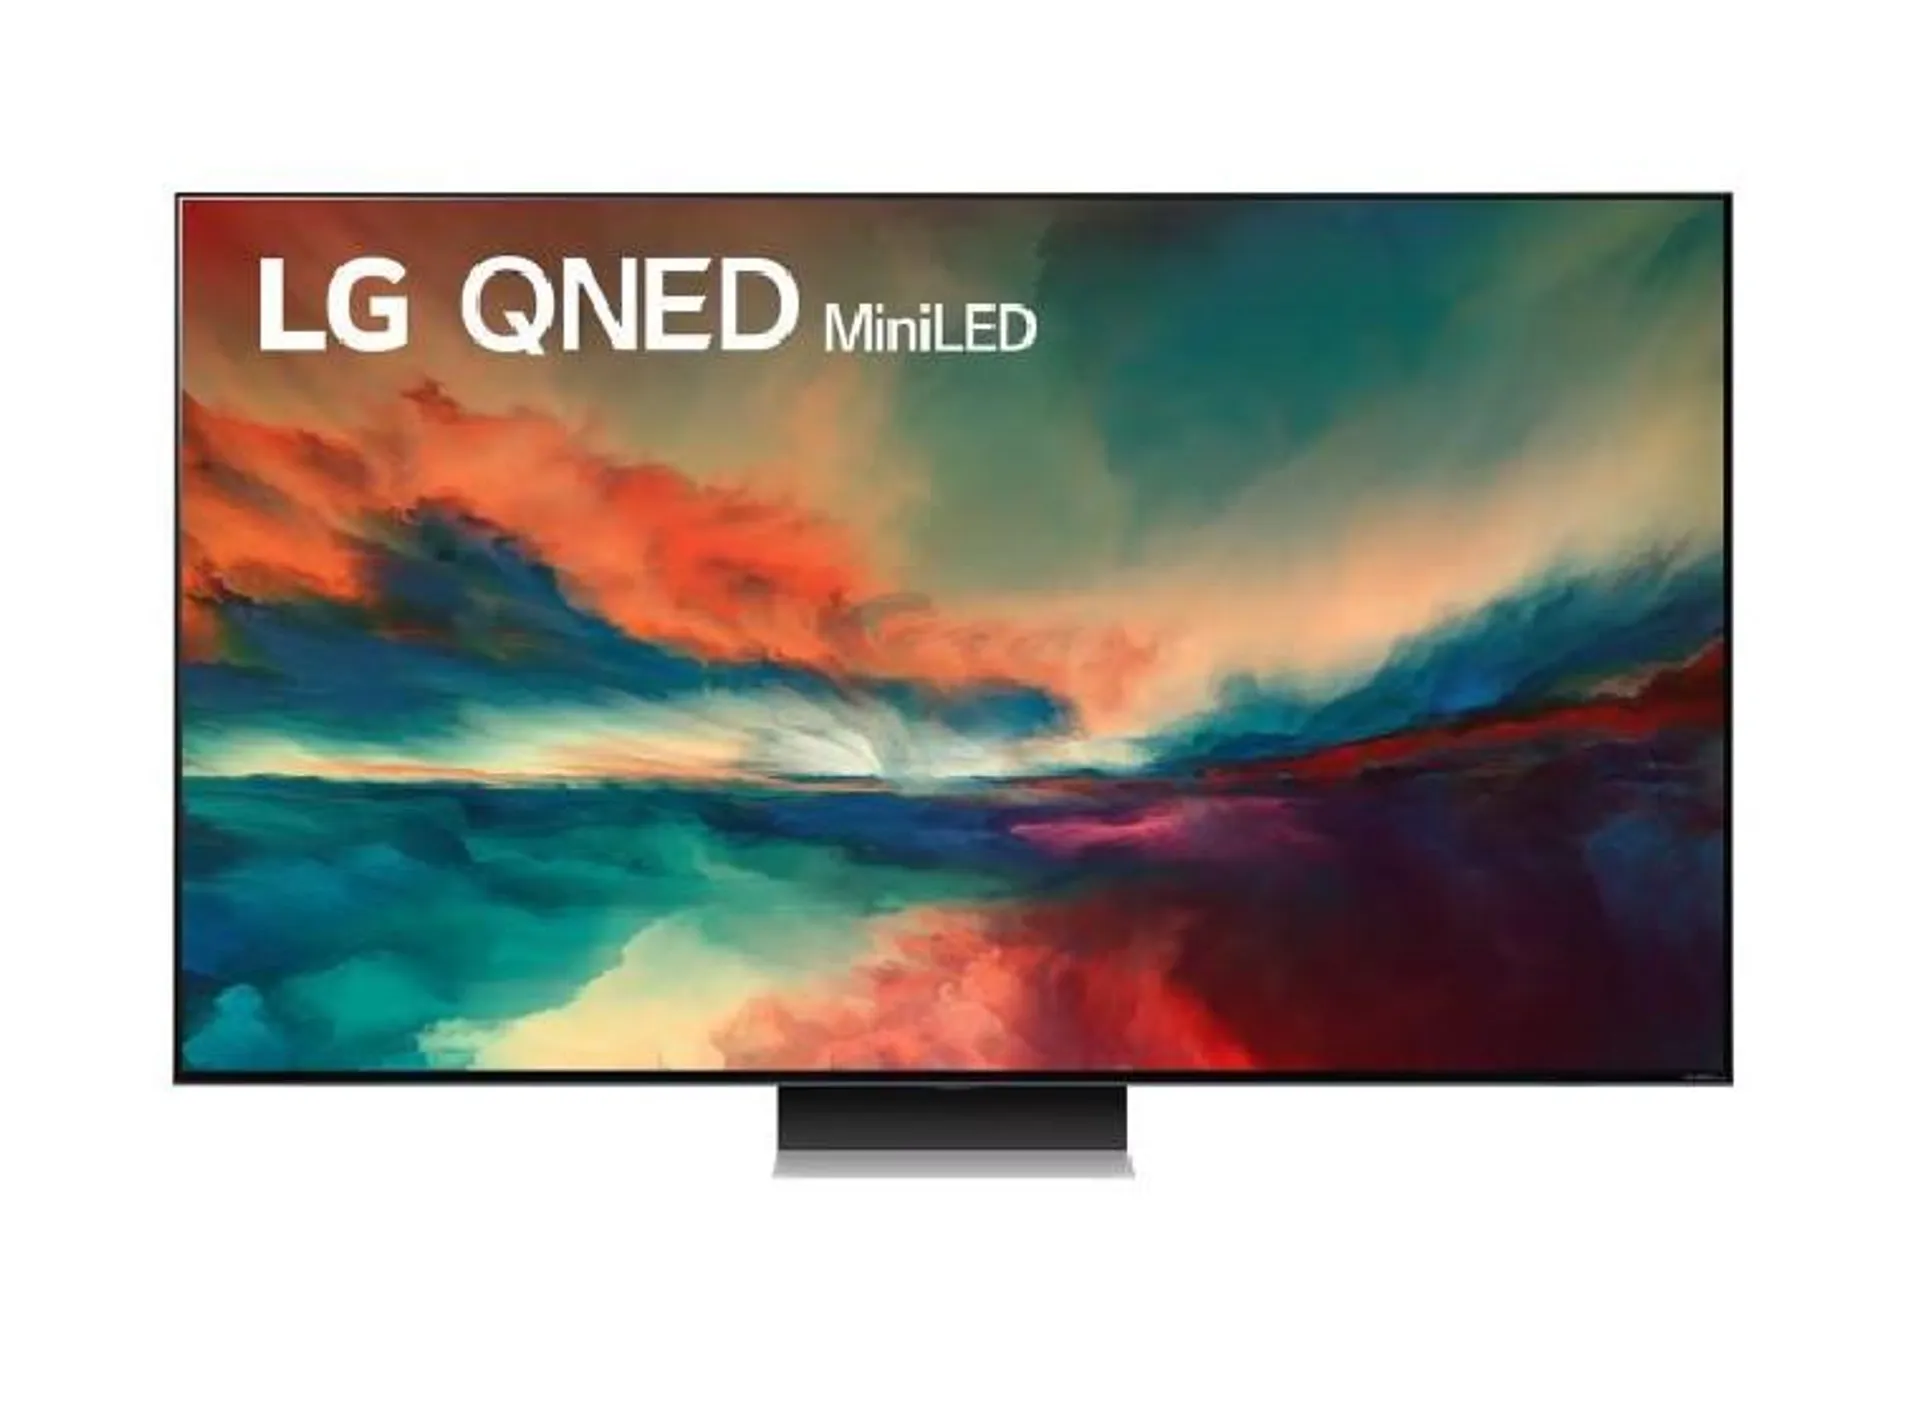 Outlet TV LG QNED MiniLED 4K de 55'' Serie 86, Procesador Gran Potencia, Dolby Vision / Dolby ATMOS, Smart TV webOS23